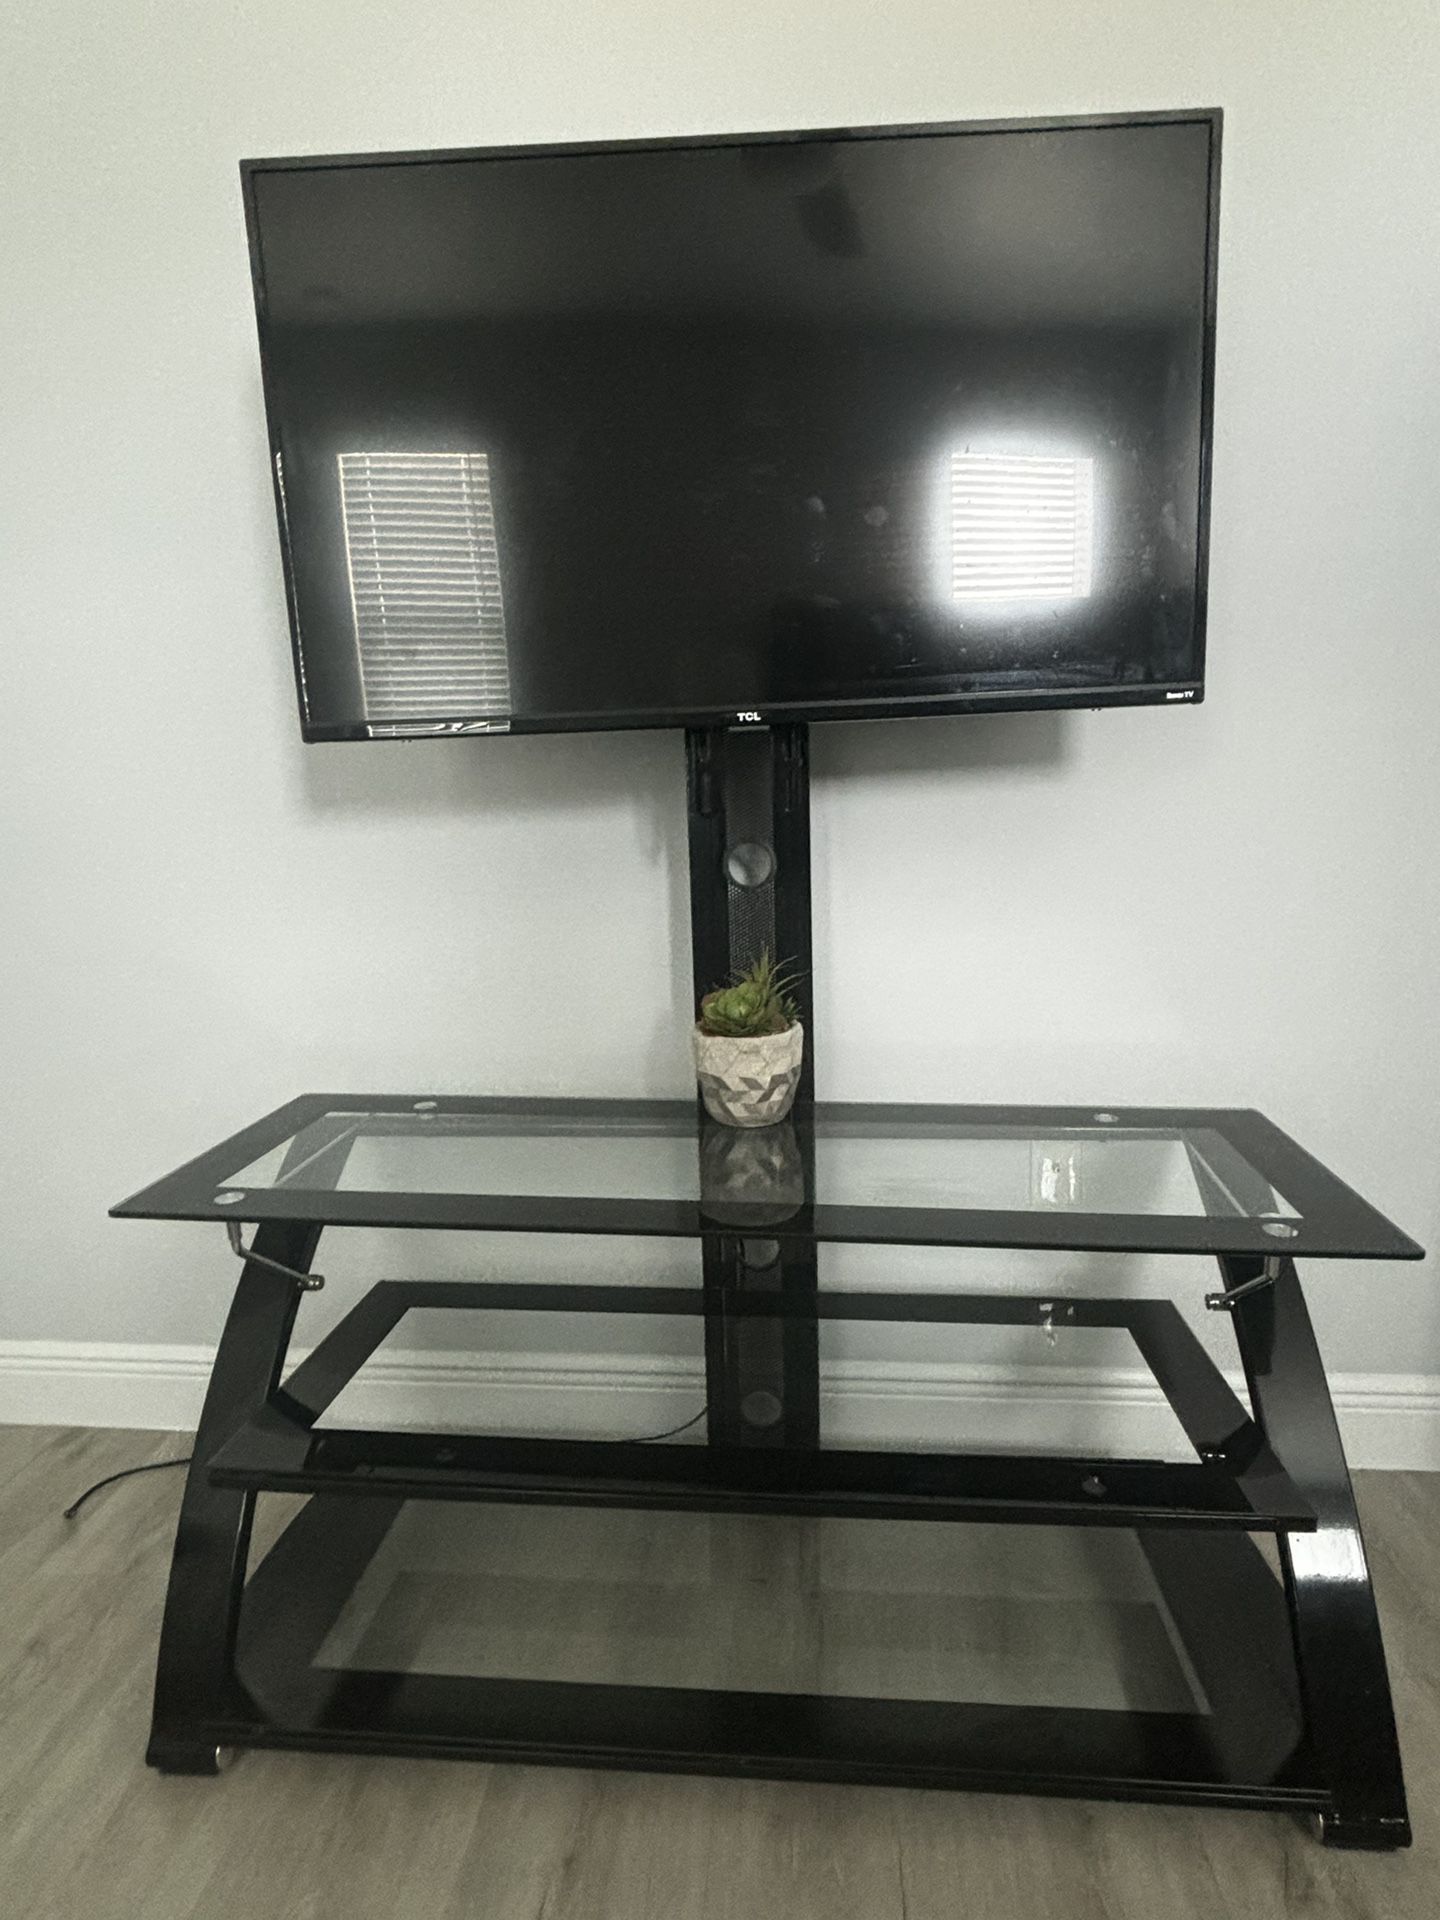 TV Stand $30